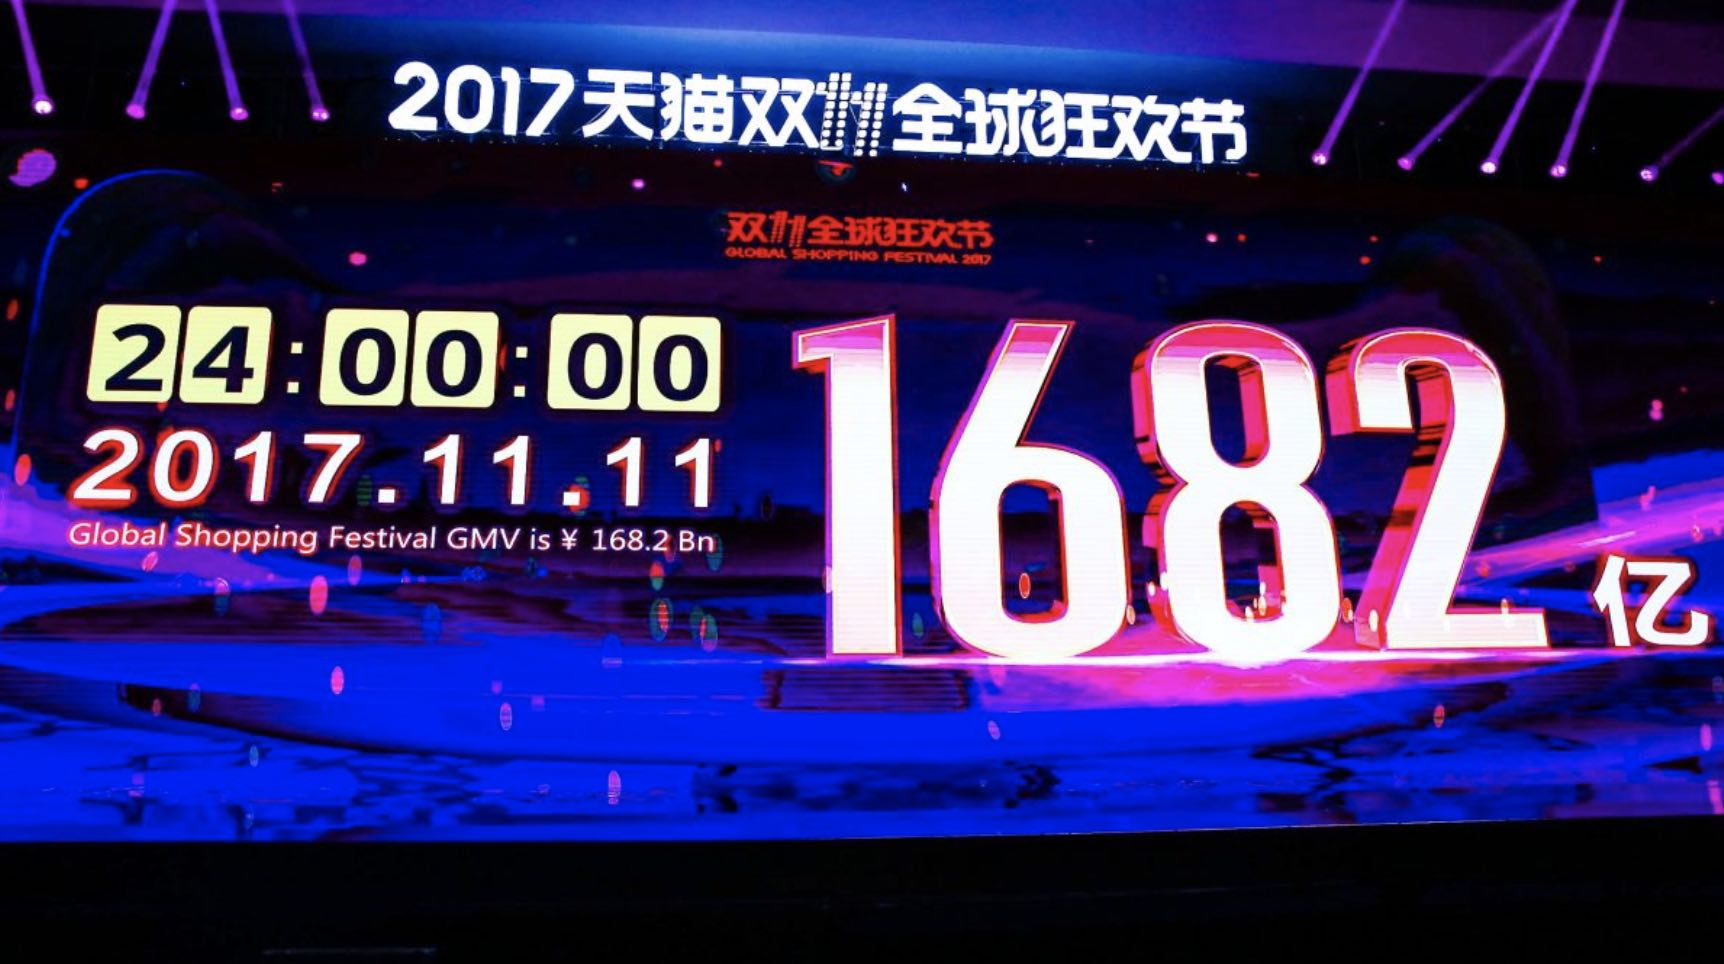 ALIBABA 2017 11.11 GLOBAL SHOPPING FESTIVAL BY THE NUMBERS COVER